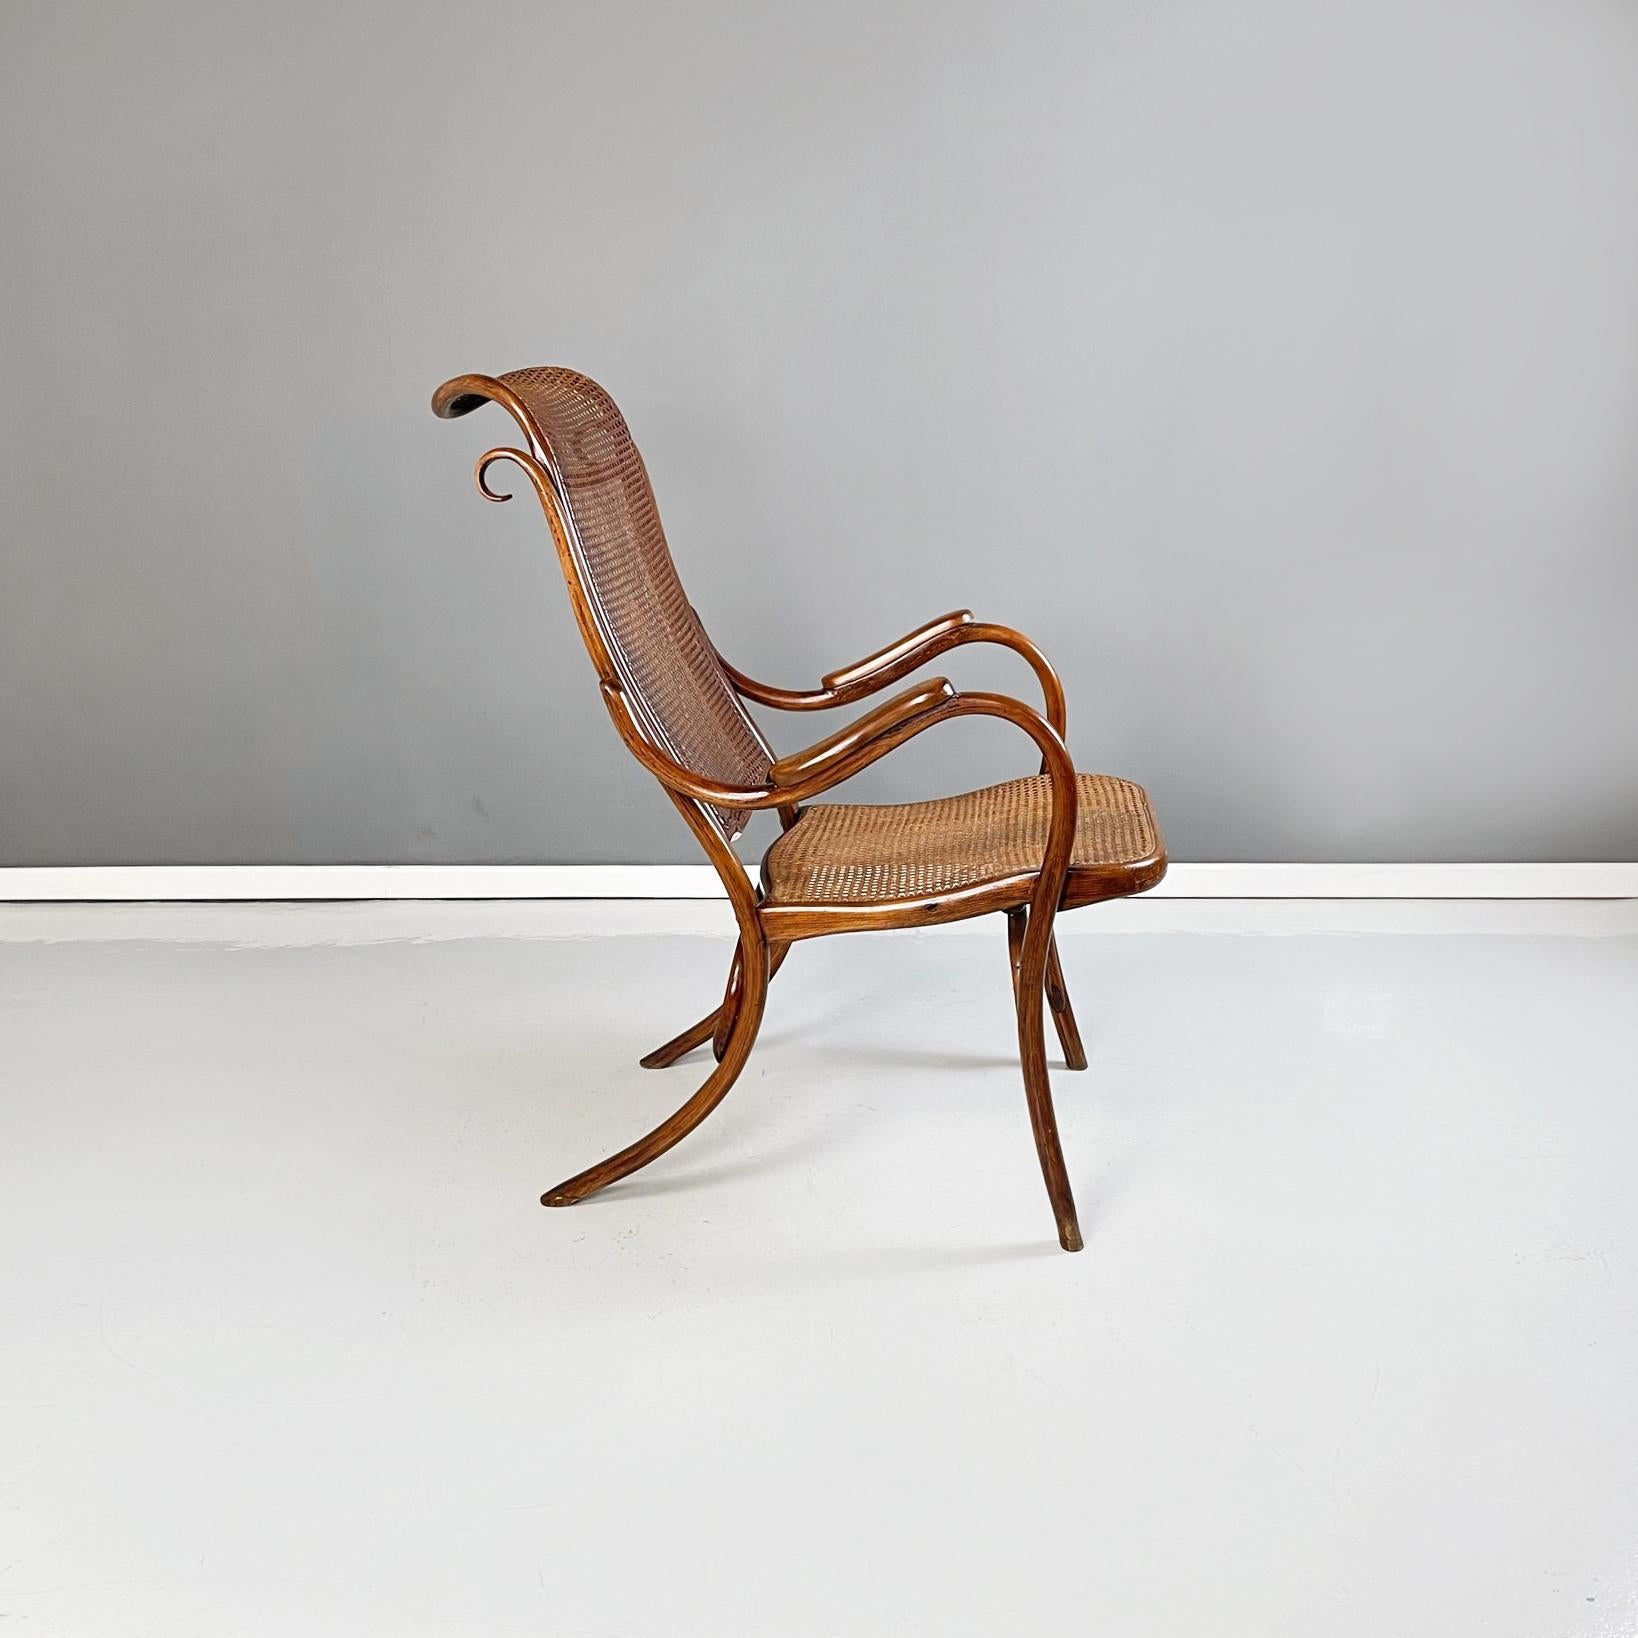 Vienna Secession Austrian Armchair with Dark Brown Straw and Solid Wood in Thonet Style, 1900s For Sale